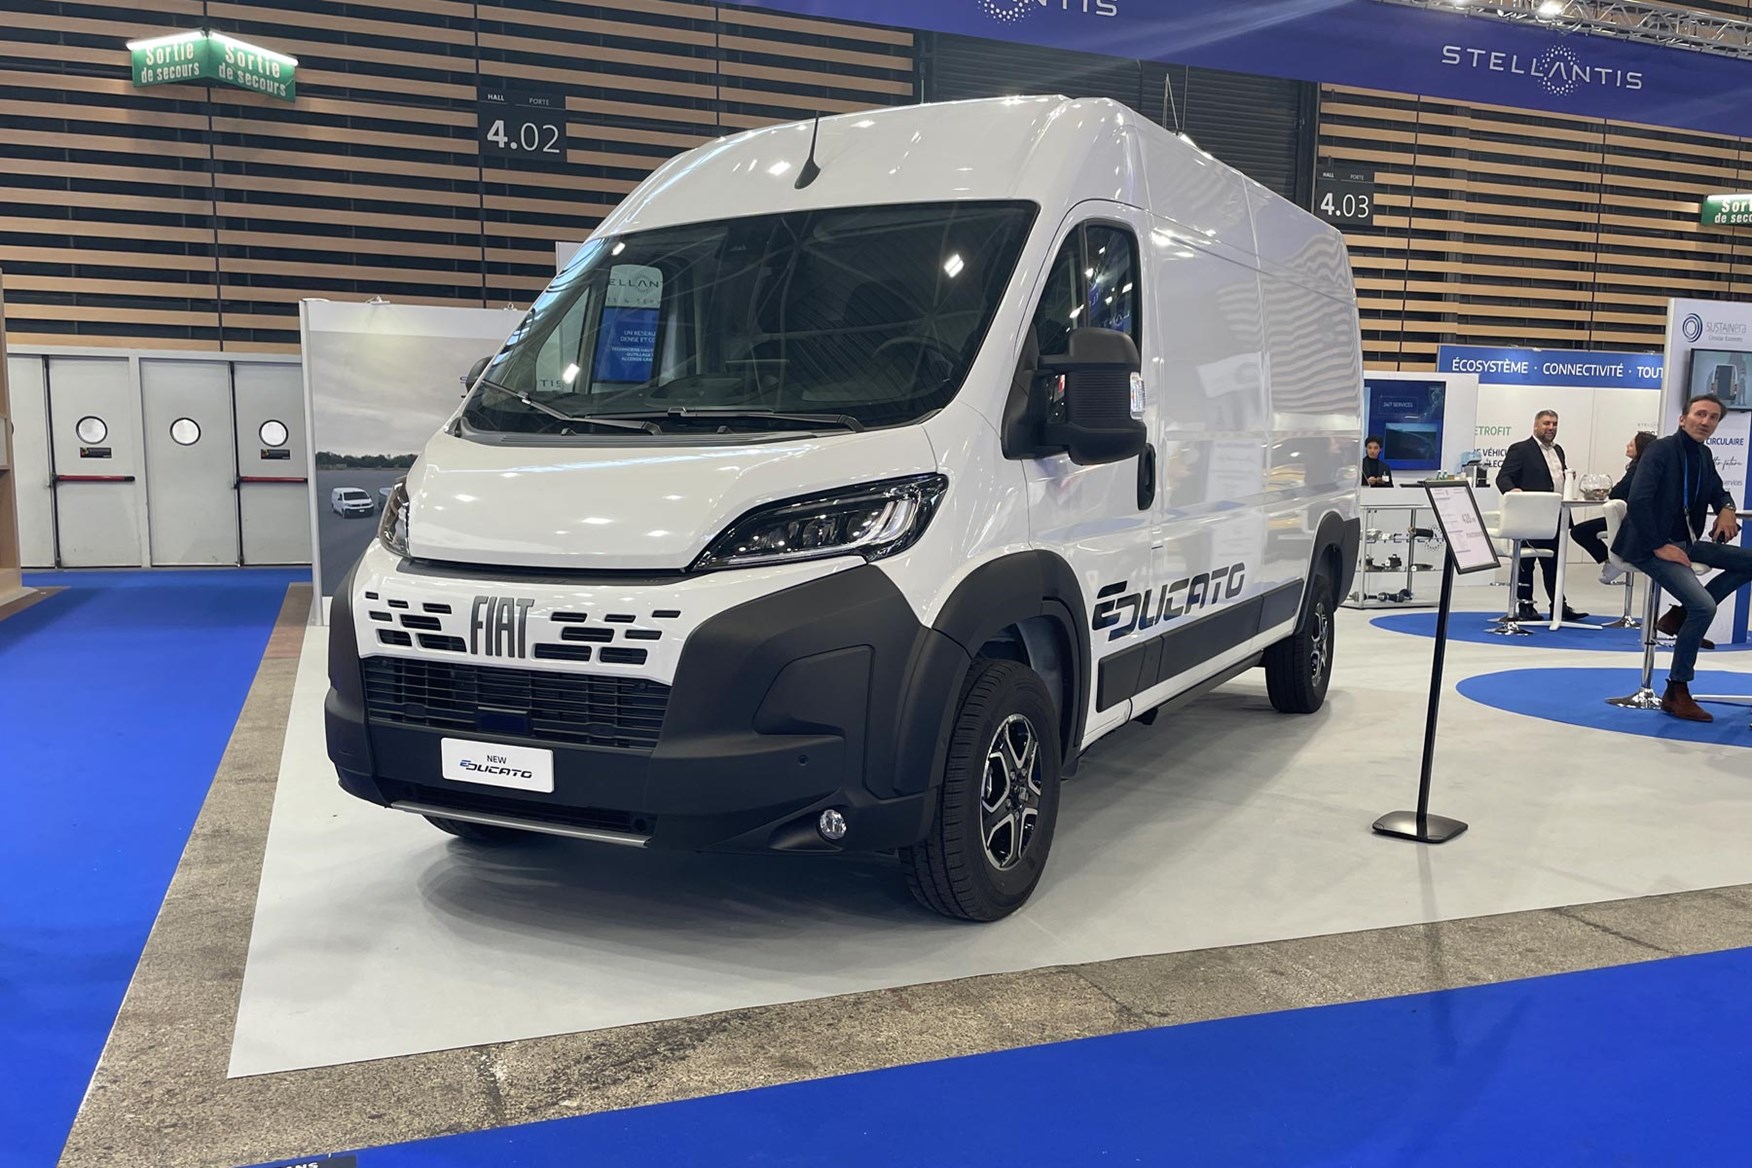 Coming Soon: New 2024 Fiat Ducato Facelift Revealed - Full-Size